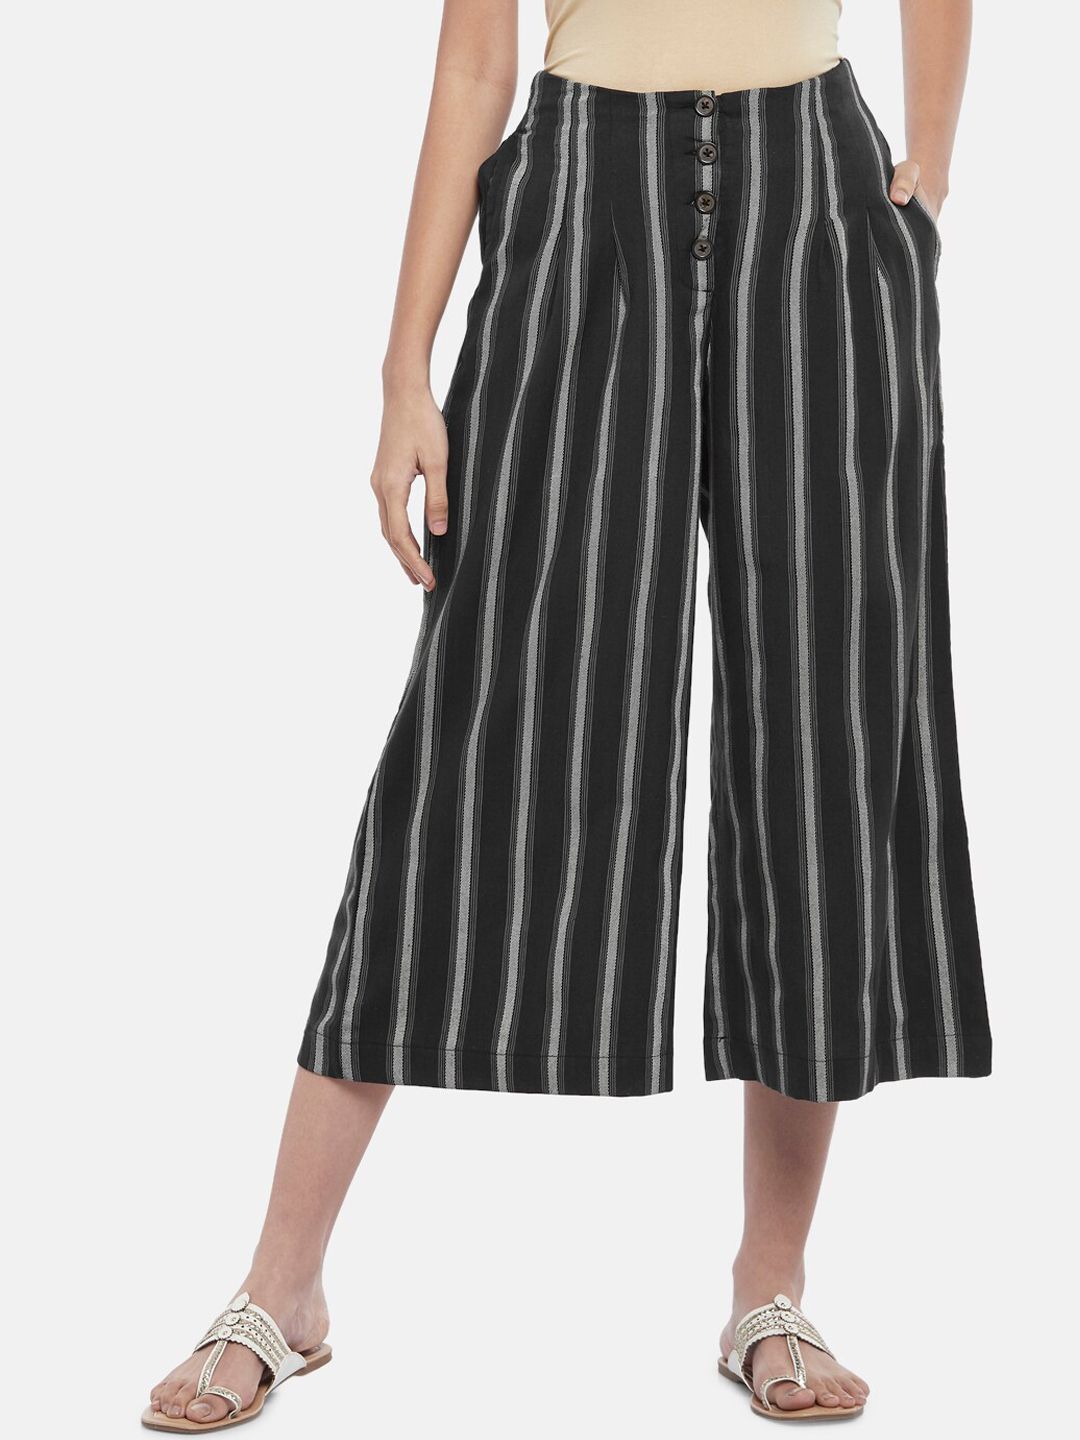 AKKRITI BY PANTALOONS Women Black Striped Culottes Trousers Price in India